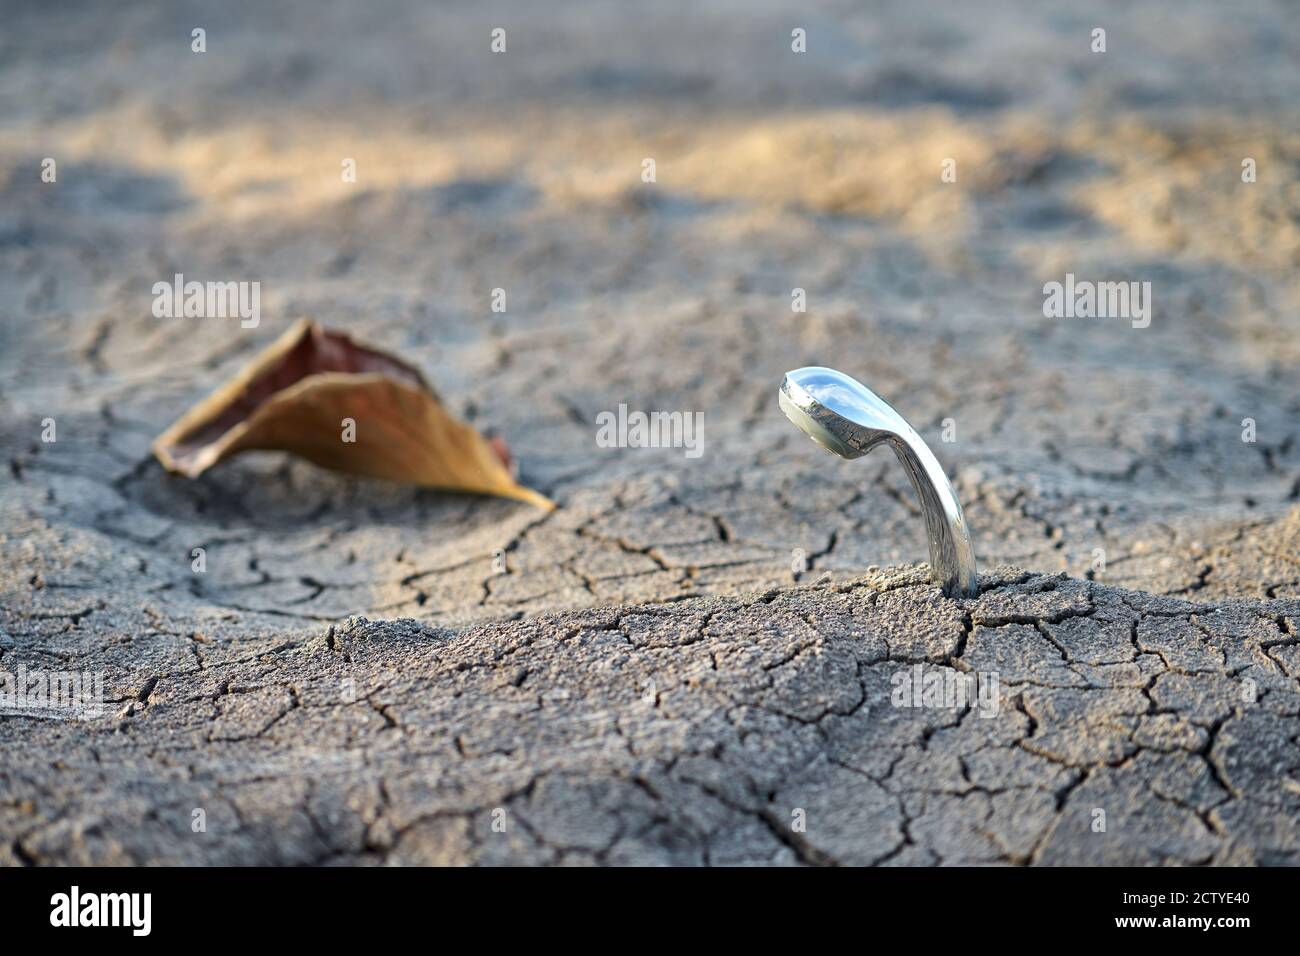 A shower head and dead leaf in dry cracked earth landscape. Stock Photo